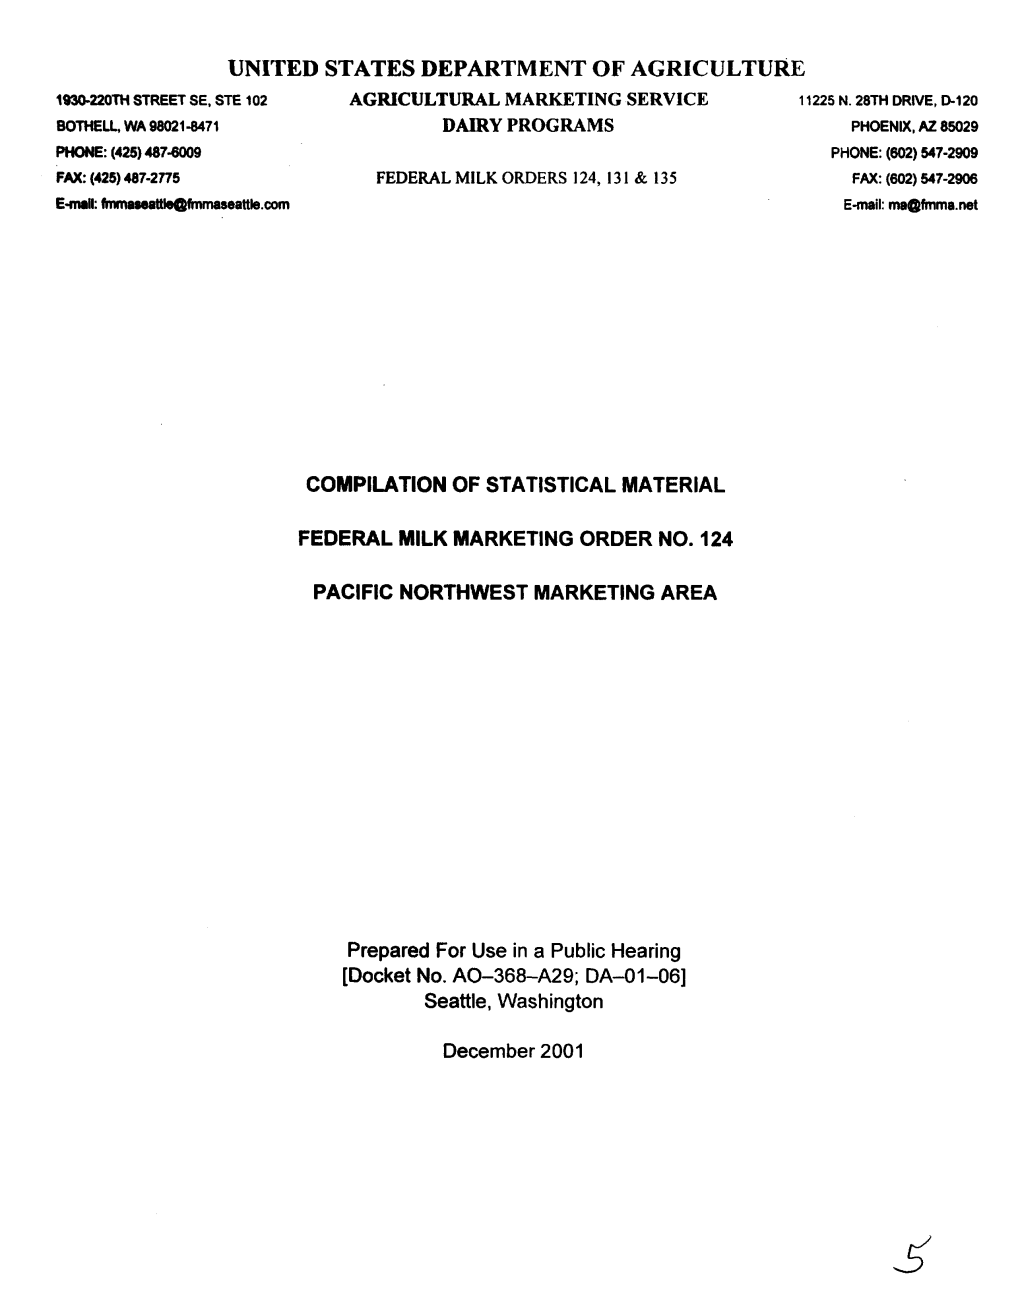 COMPILATION of STATISTICAL MATERIAL FEDERAL MILK MARKETING ORDER NO. 124 PACIFIC NORTHWEST MARKETING AREA Prepared for Use in A